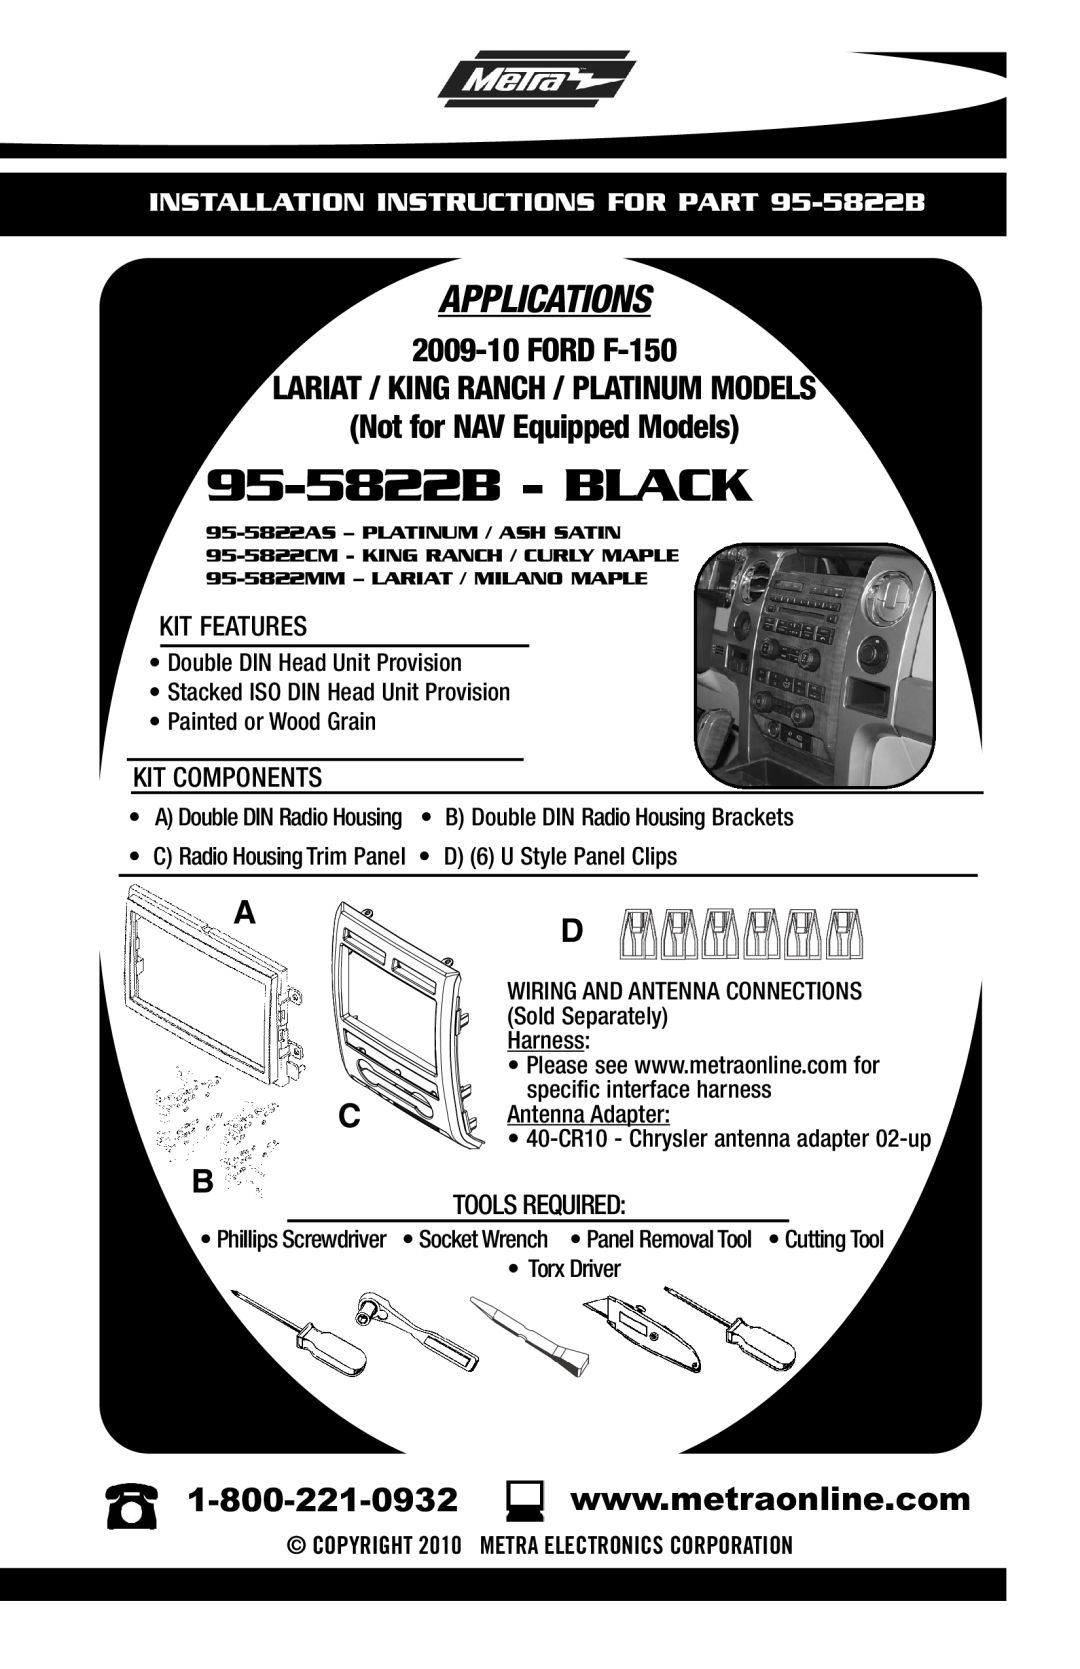 Metra Electronics 955822 installation instructions 95-5822B - BLACK, Applications, Not for NAV Equipped Models 